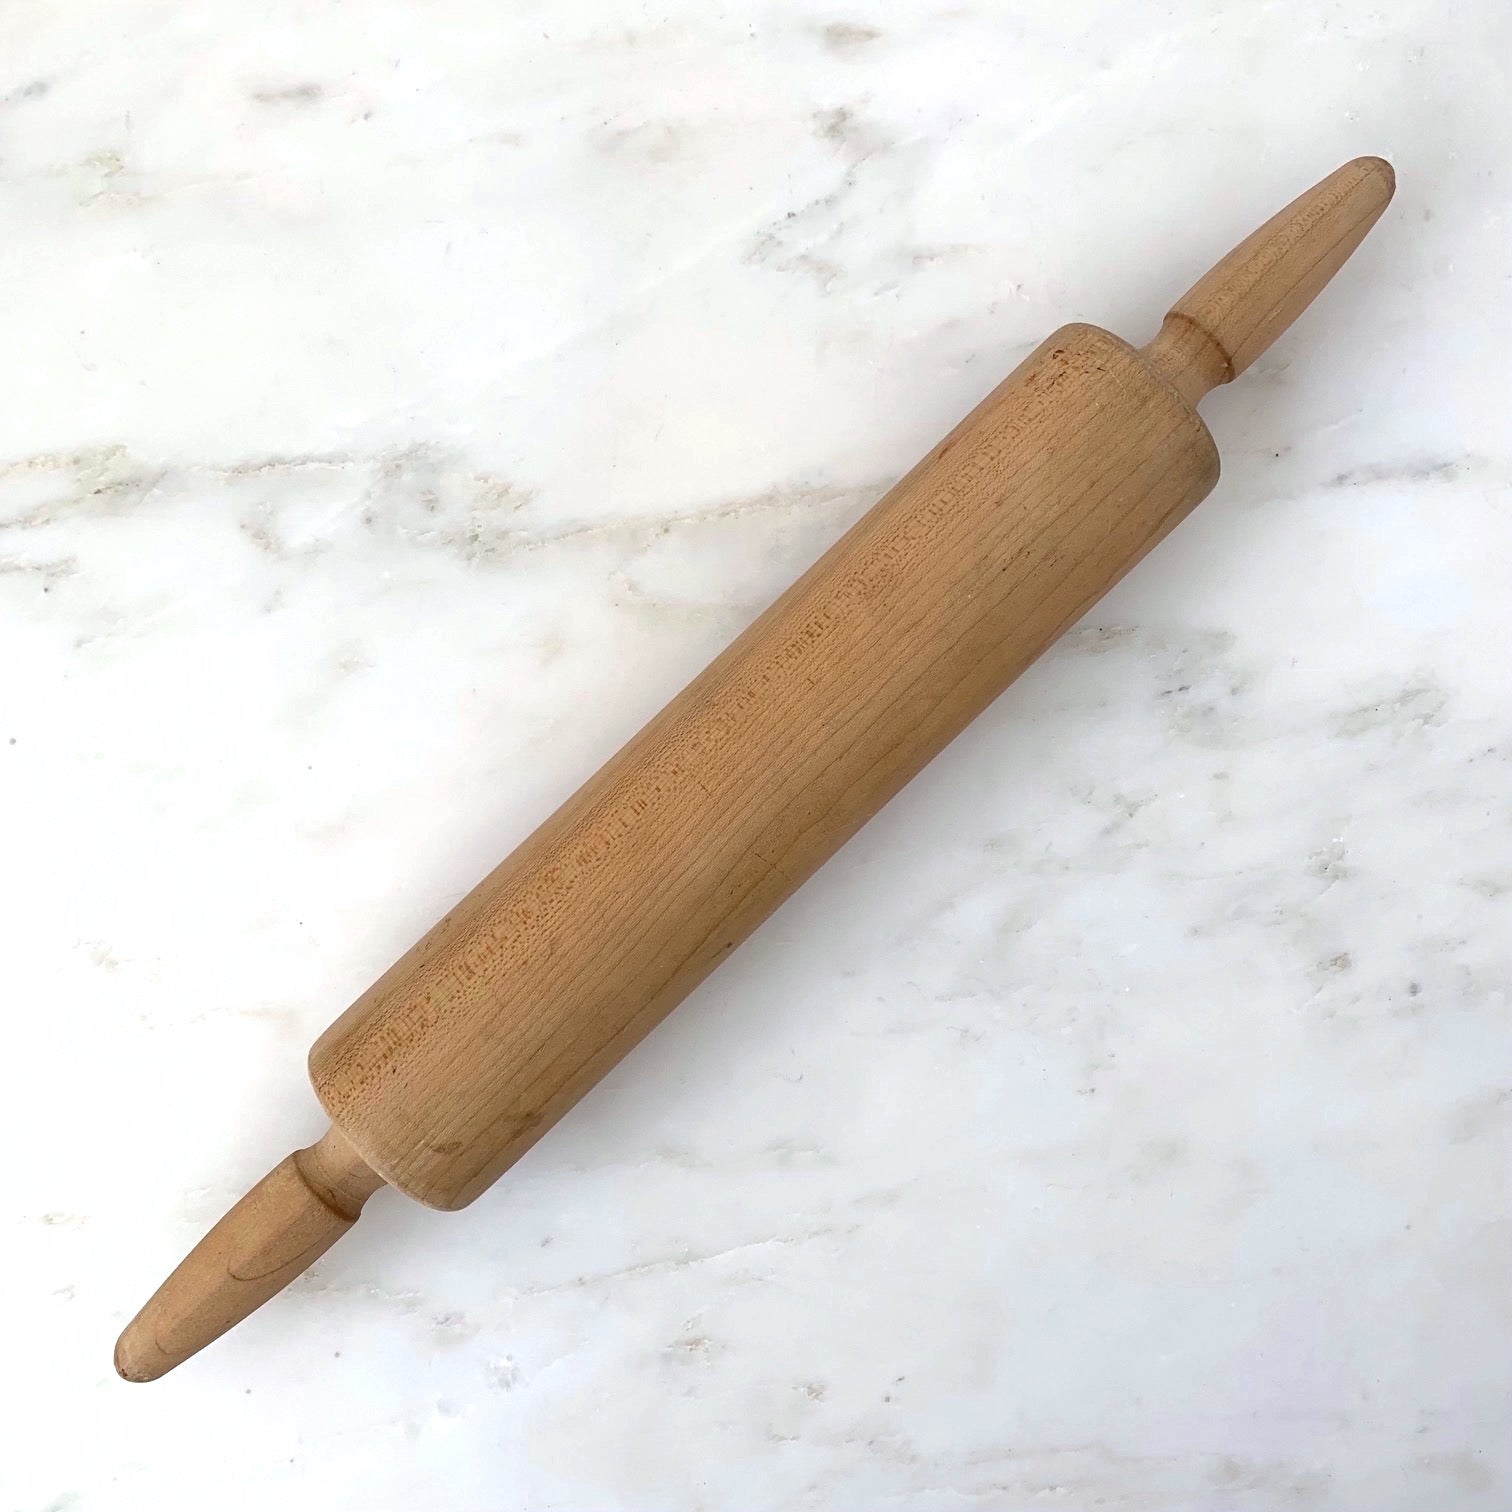 VTG FOLEY SIGNED 18” SOLID MAPLE ROLLING PIN